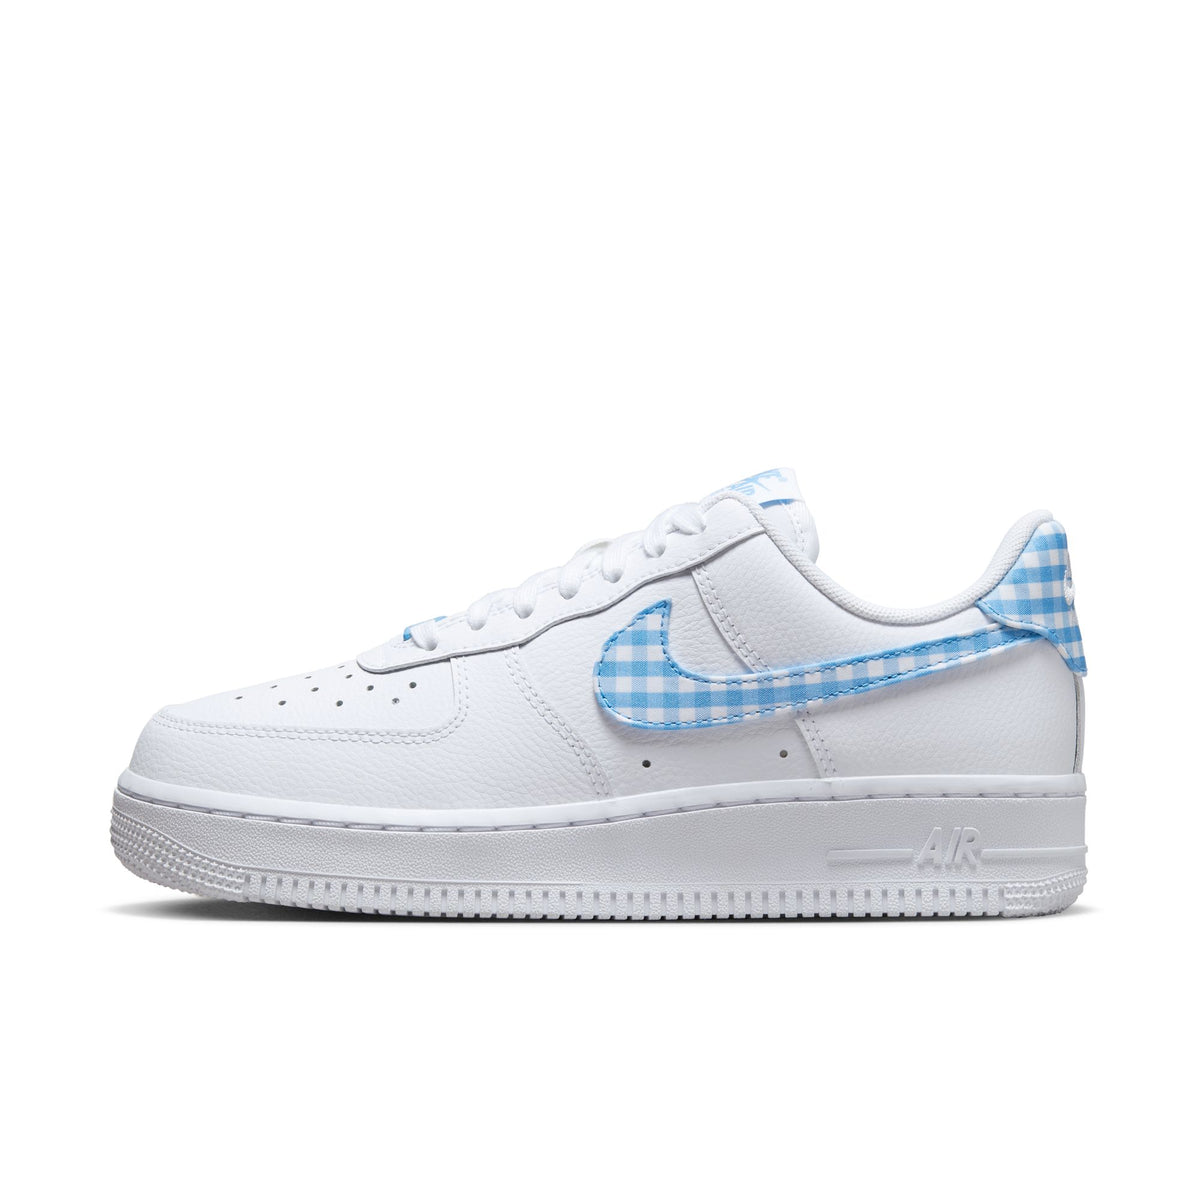 WMNS Nike Air Force 1 "Blue Gingham"